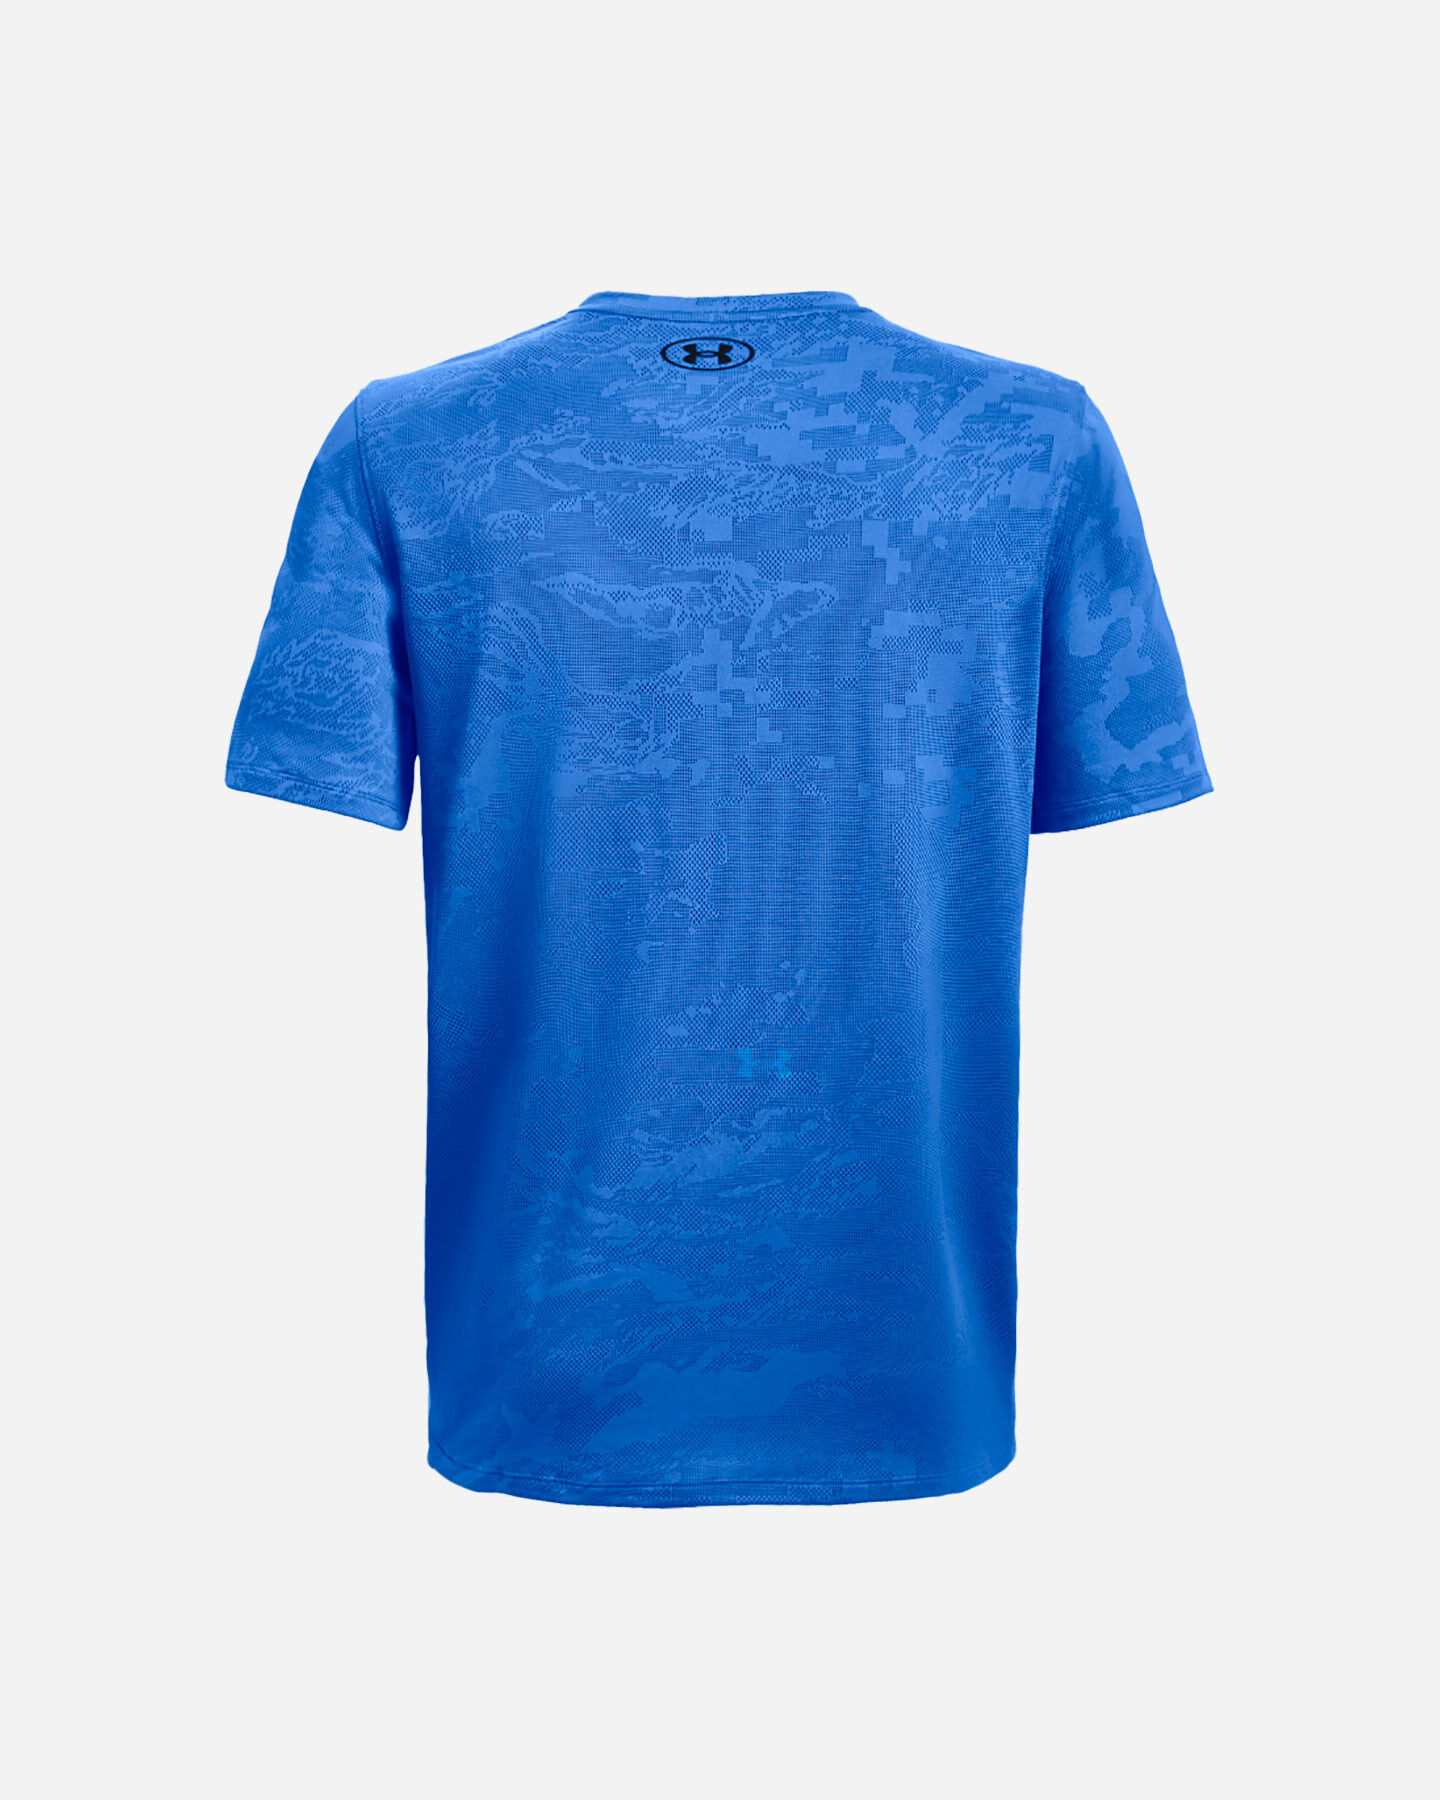  T-Shirt training UNDER ARMOUR TRAINING VENT M S5287261|0436|SM scatto 1